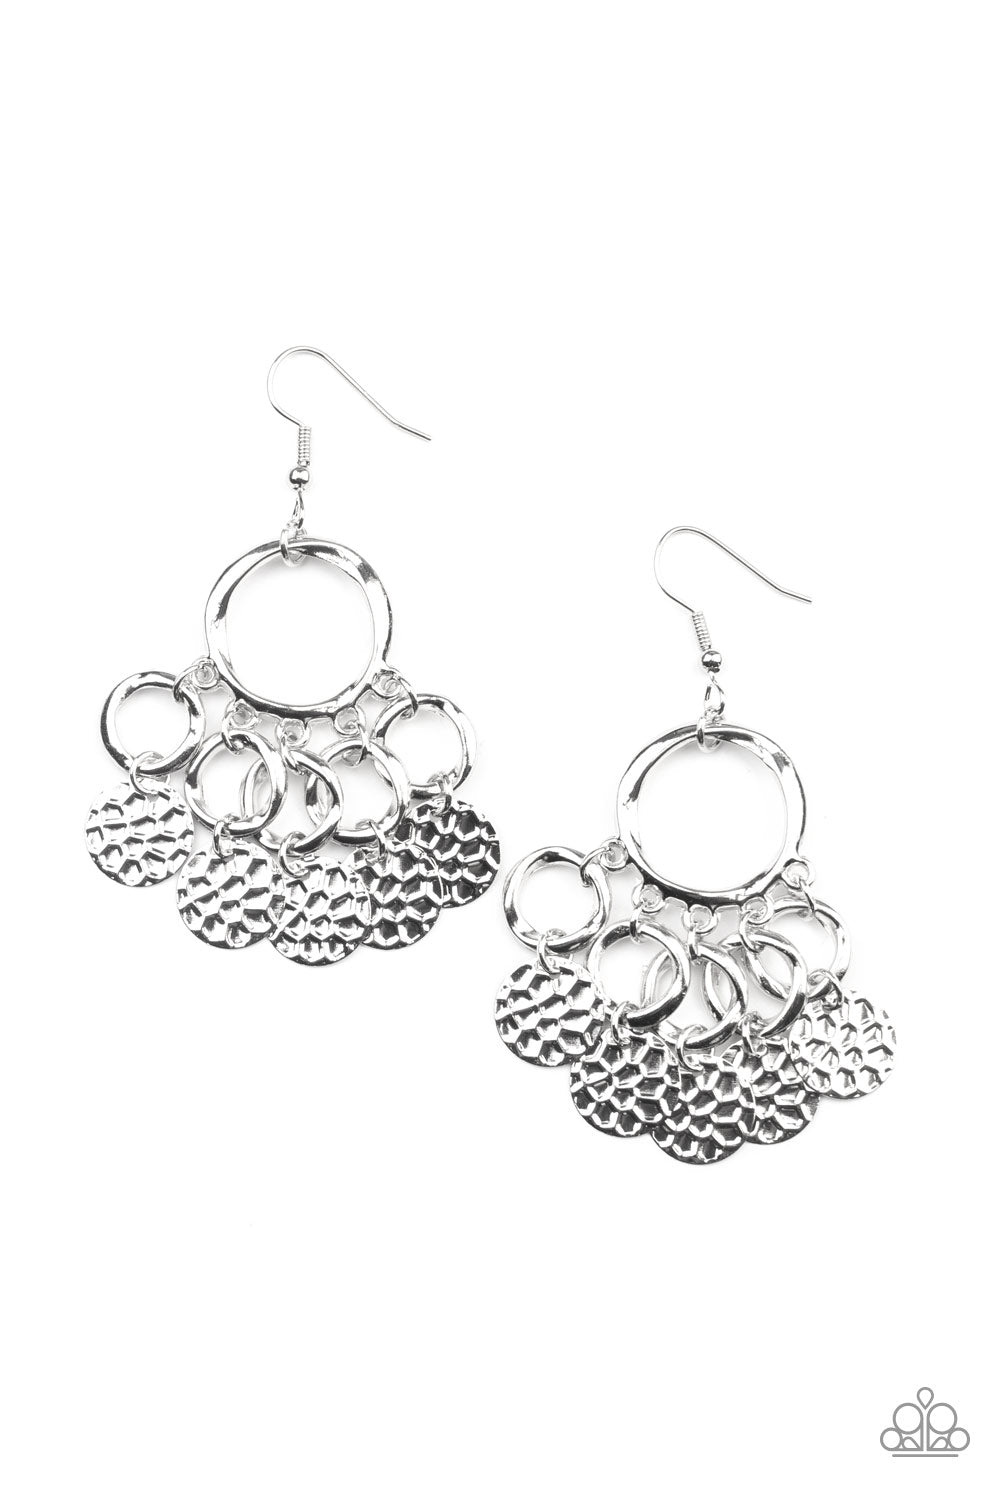 Partners in CHIME - Silver Earrings - Paparazzi Accessories